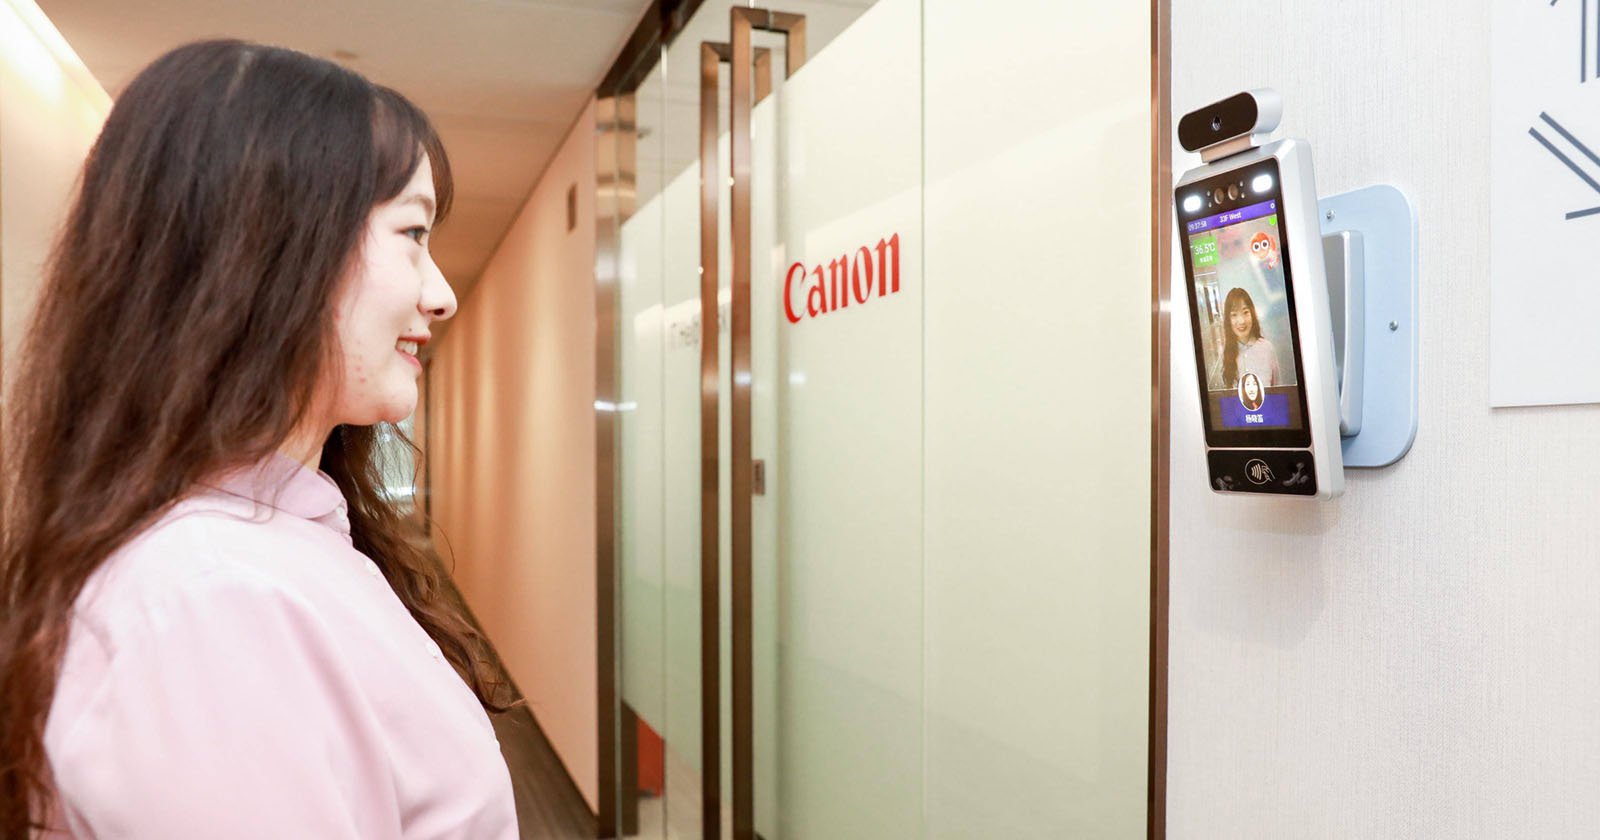 This may sound like something straight out of a sci-fi movie, but Canon has rolled out new AI cameras that use “smile recognition” technol